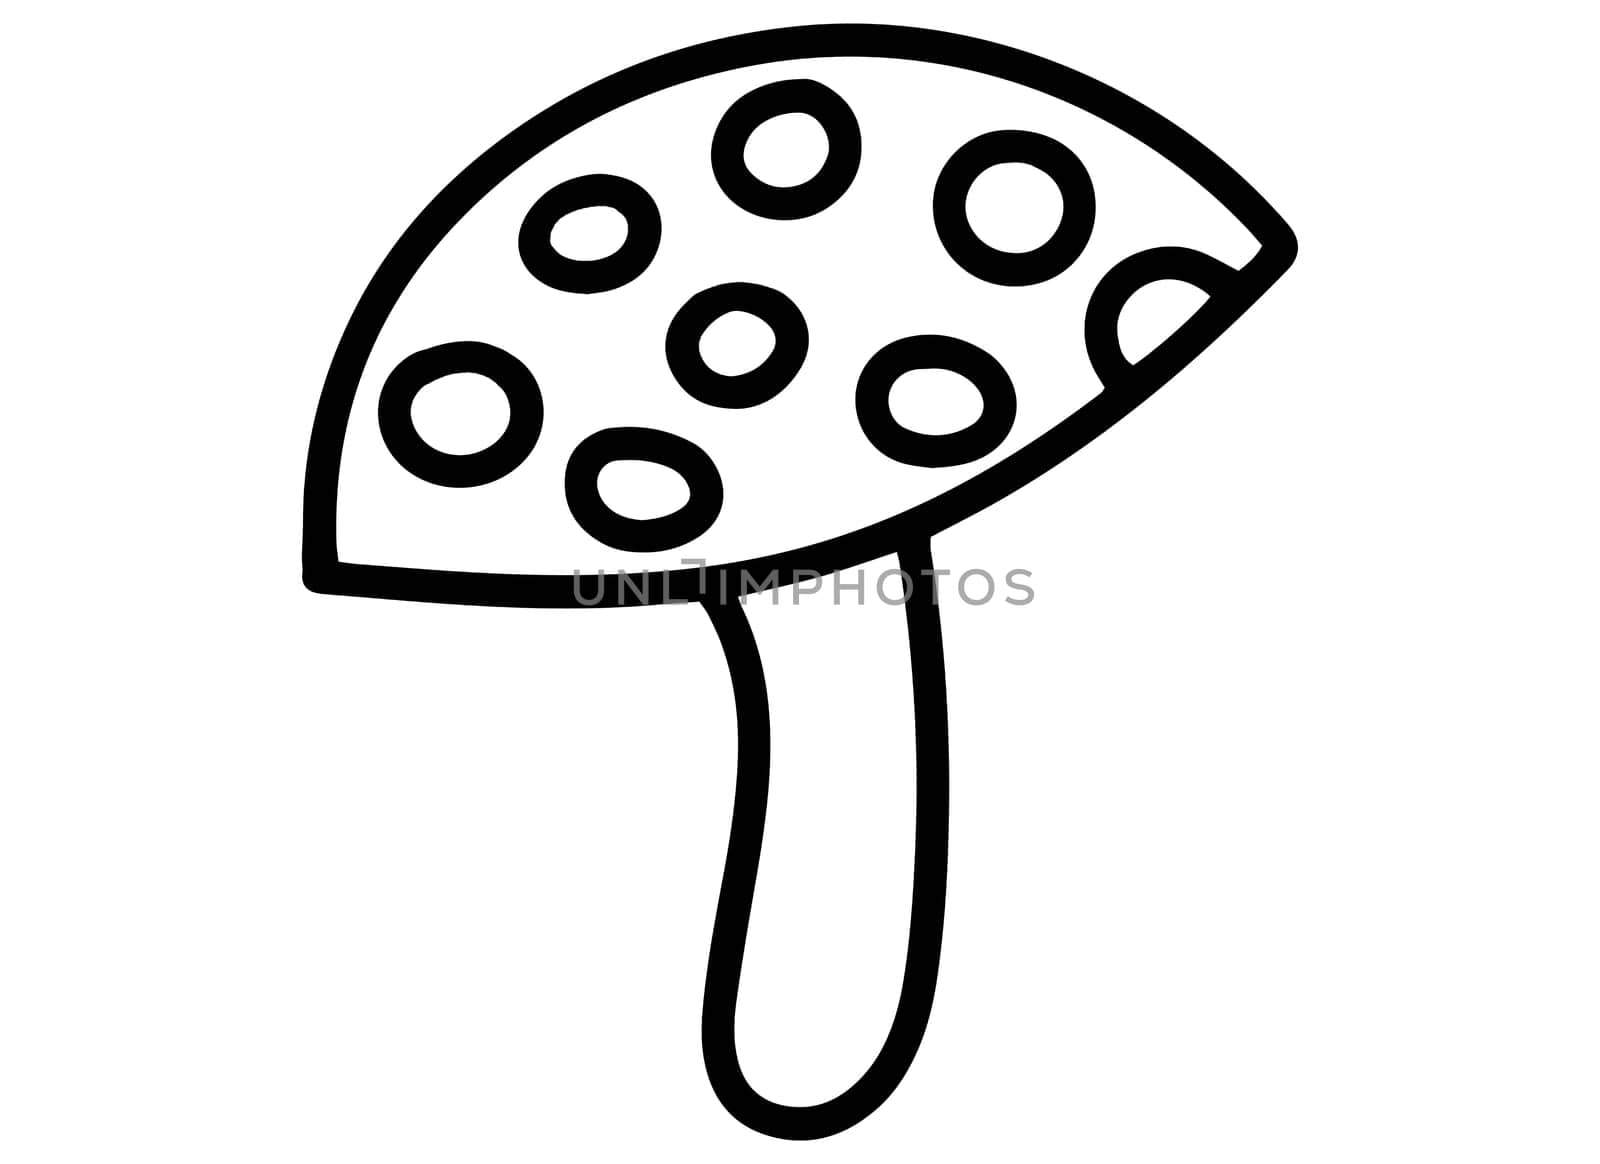 Printable Coloring Page for Kids. Black and White Mushroom Isolated Illustration. Coloring Book with Mushroom.